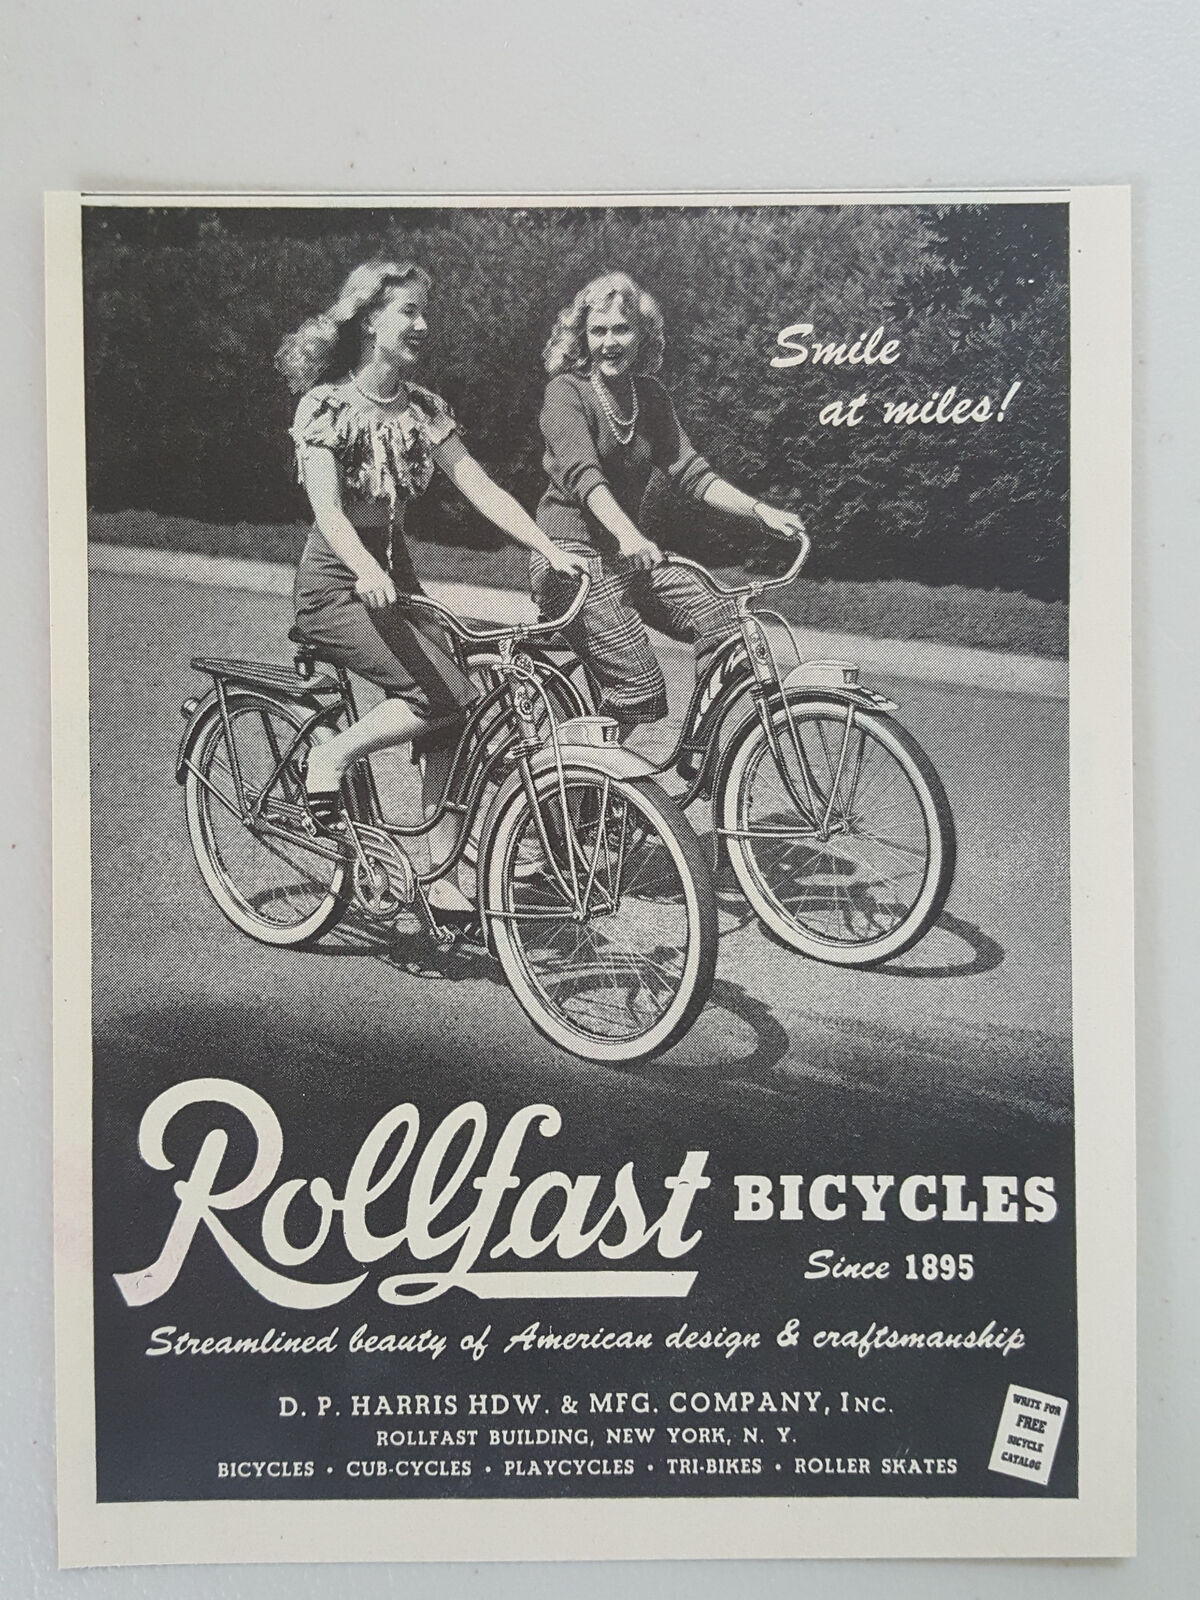 1948 Rollfast Bicycles Streamlined Women Riders Vintage Magazine Print Ad